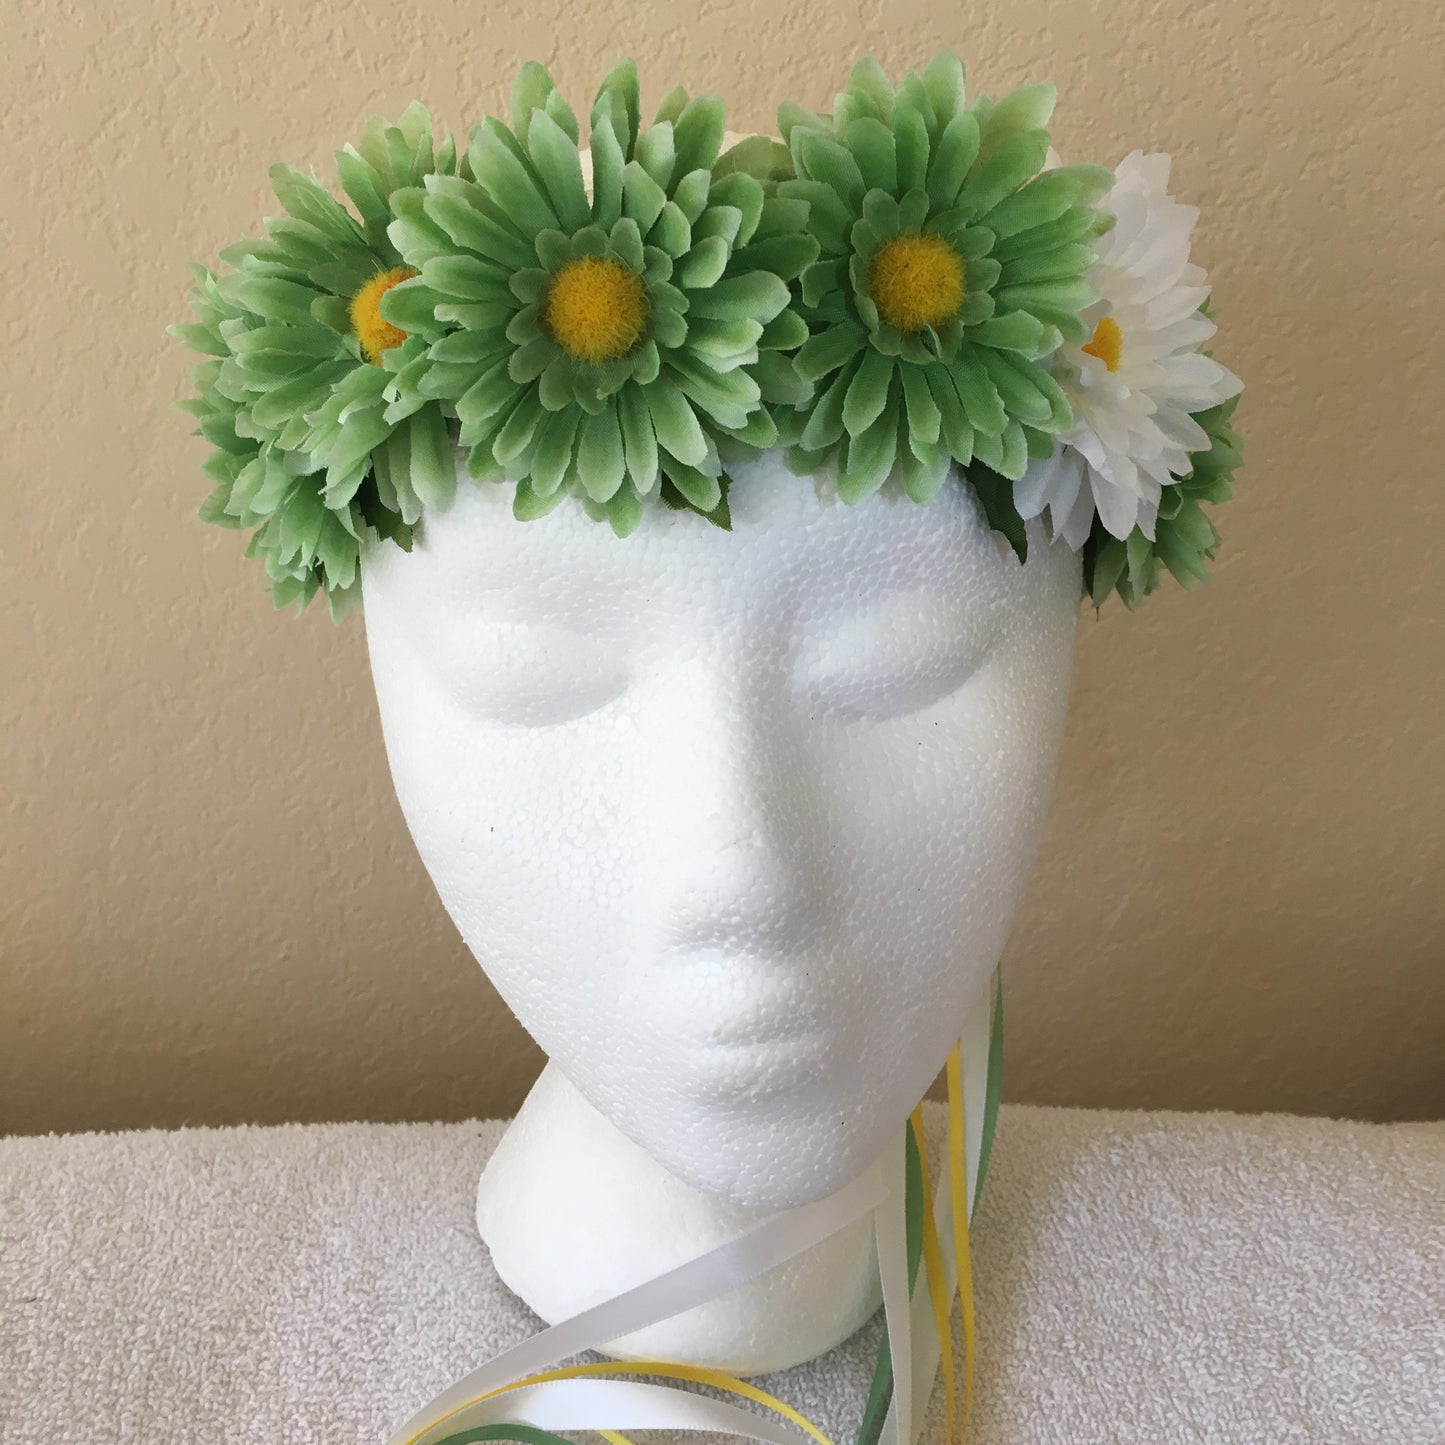 Small Wreath - Mint green daisies w/ one white accent daisy